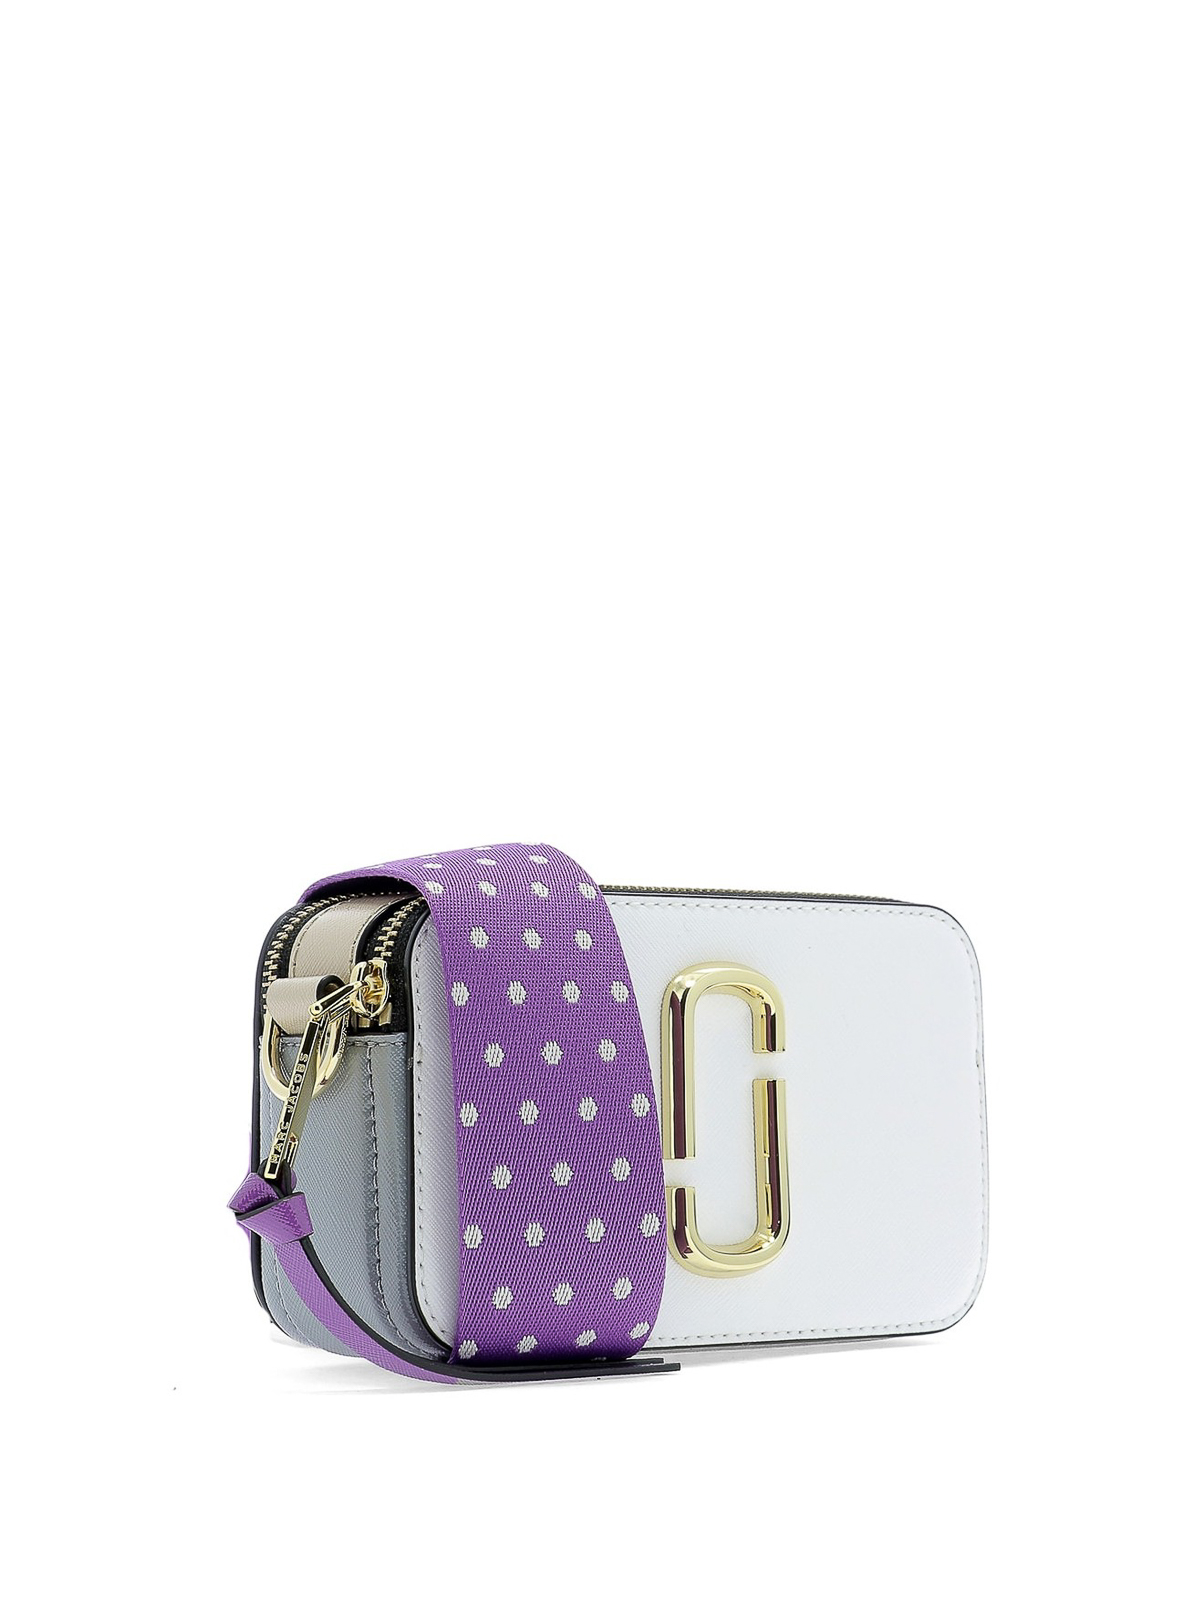 Marc Jacobs Camera Bag in Purple